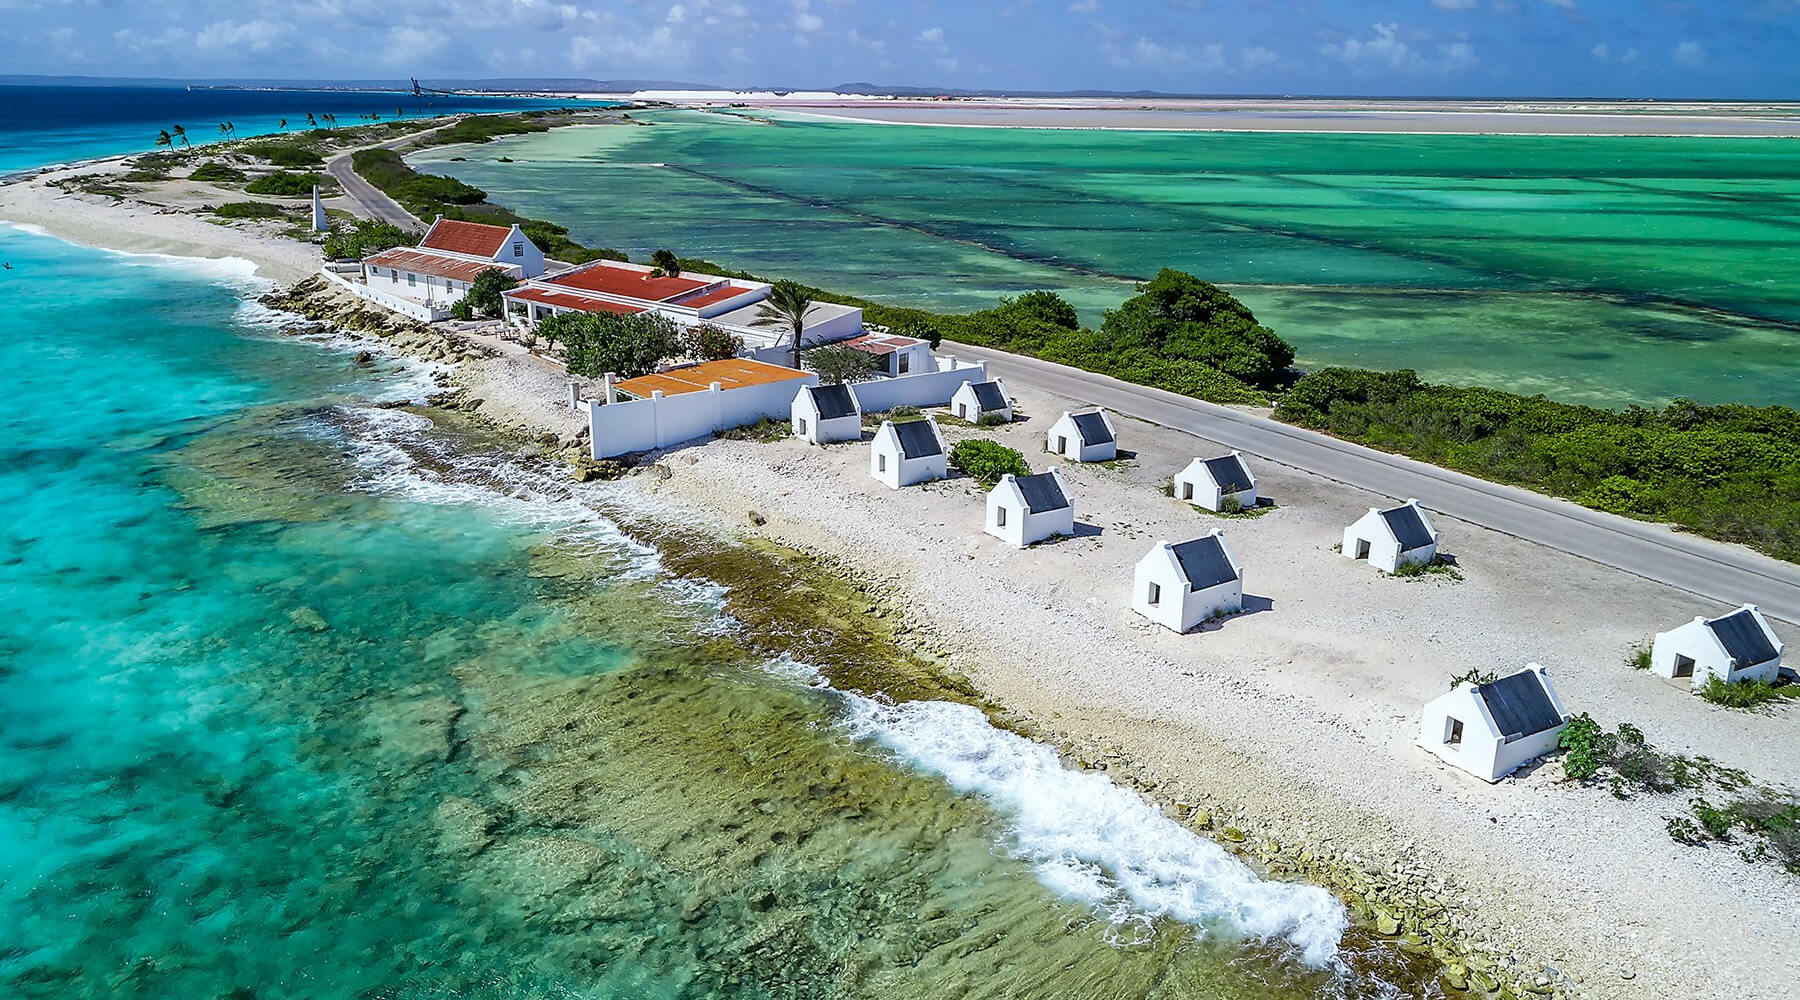 Cabins along the beaches of Bonaire